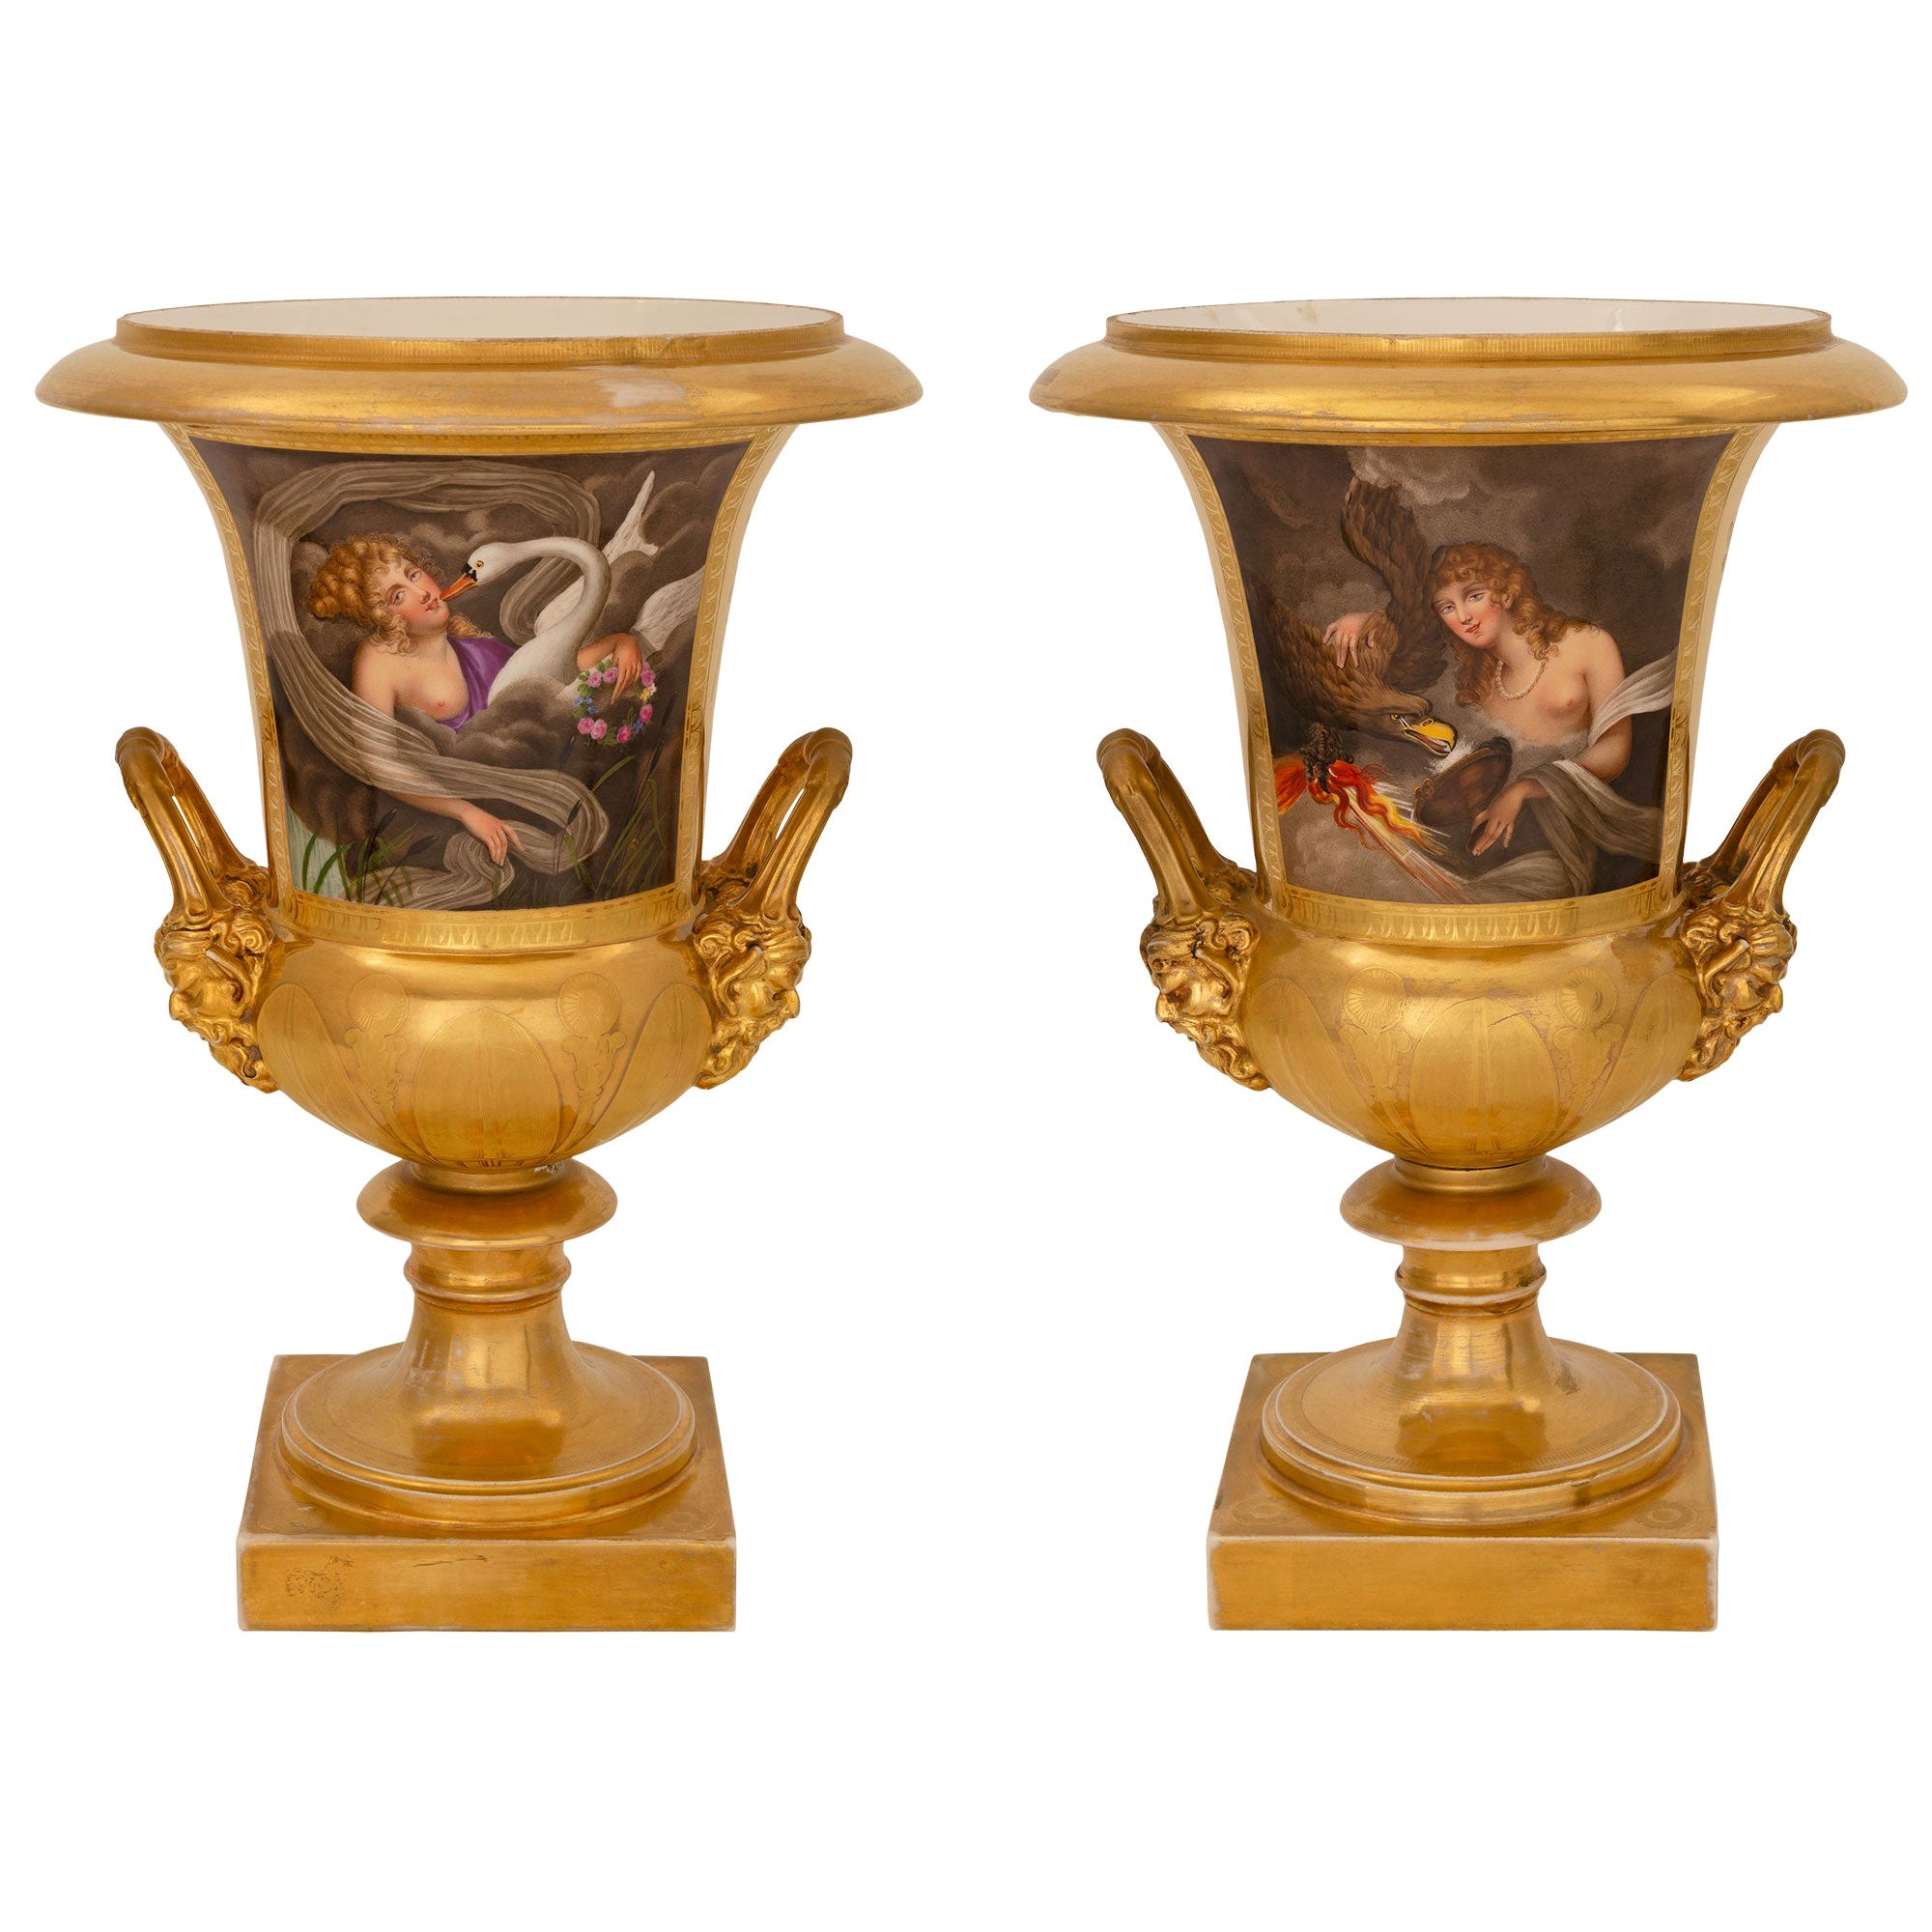 Pair of French 19th Century Neoclassical Style Porcelain De Paris Urns For Sale